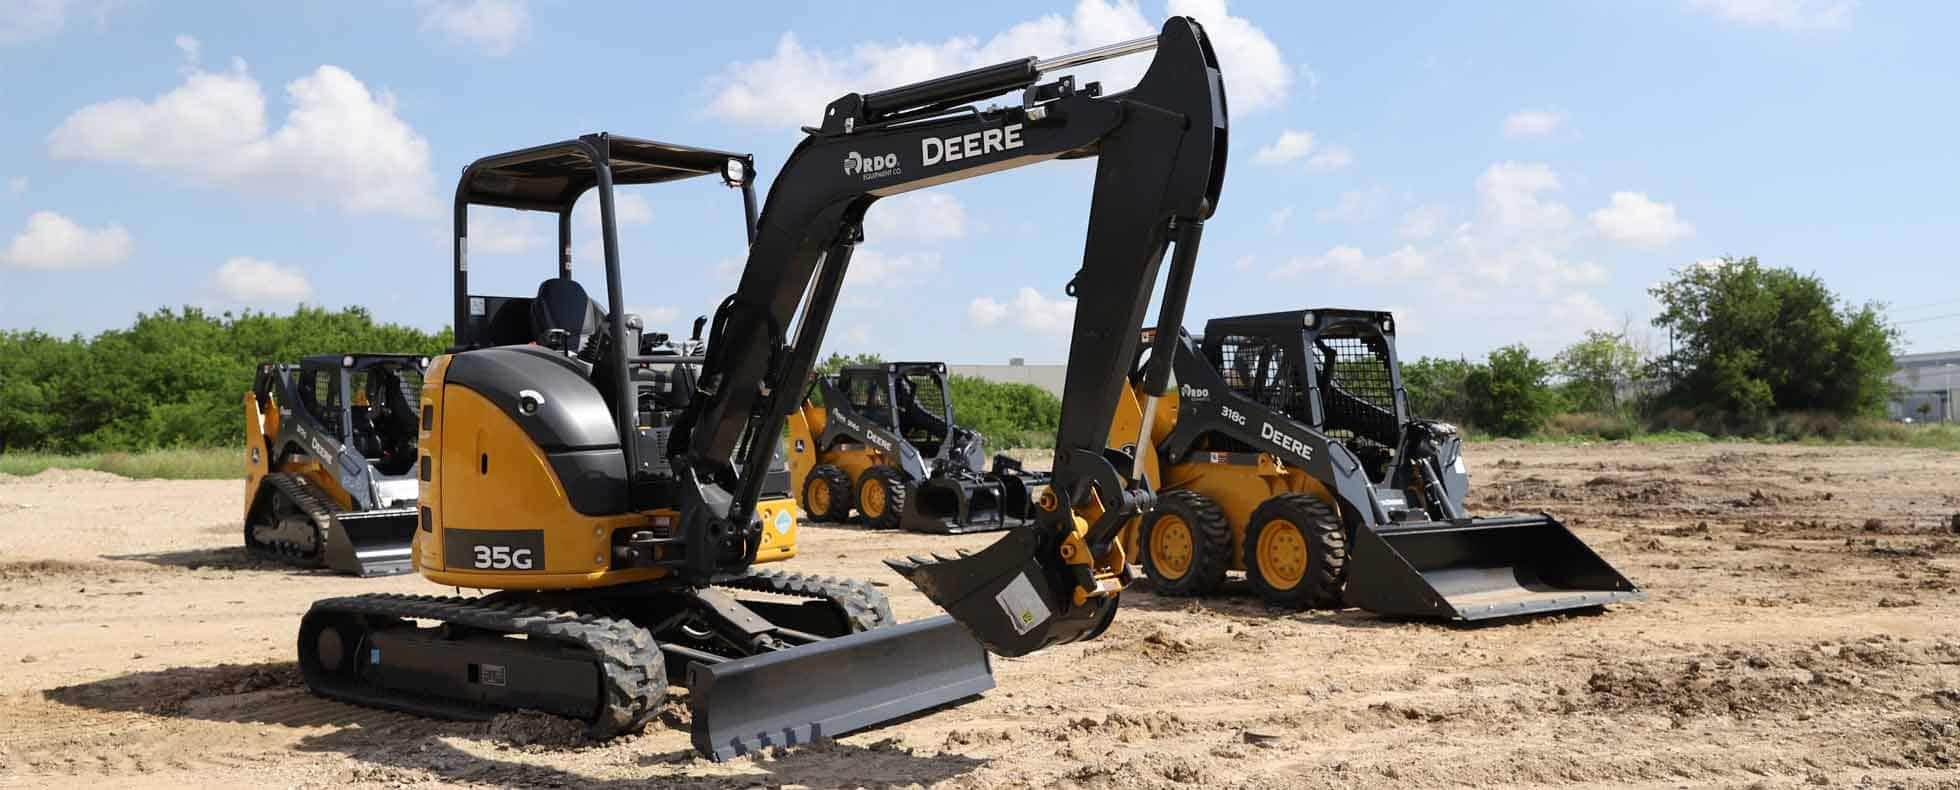 RDO Equipment Co. Expands Compact Construction Footprint in Montana [Press Release]